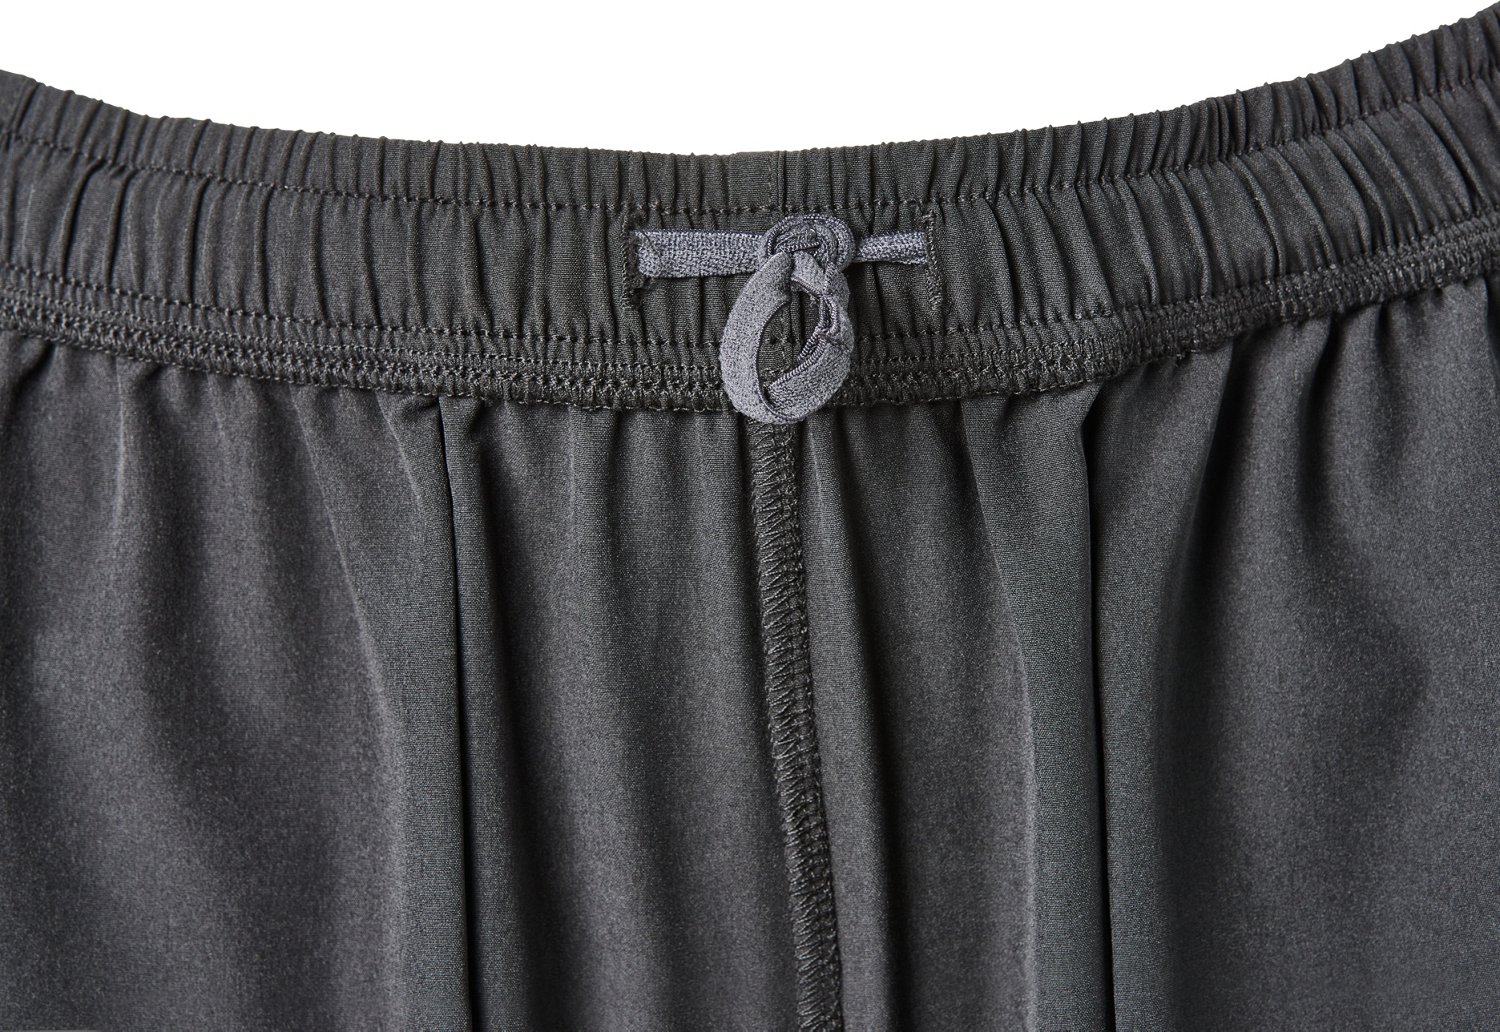 BCG Women's Walk Shorts                                                                                                          - view number 5